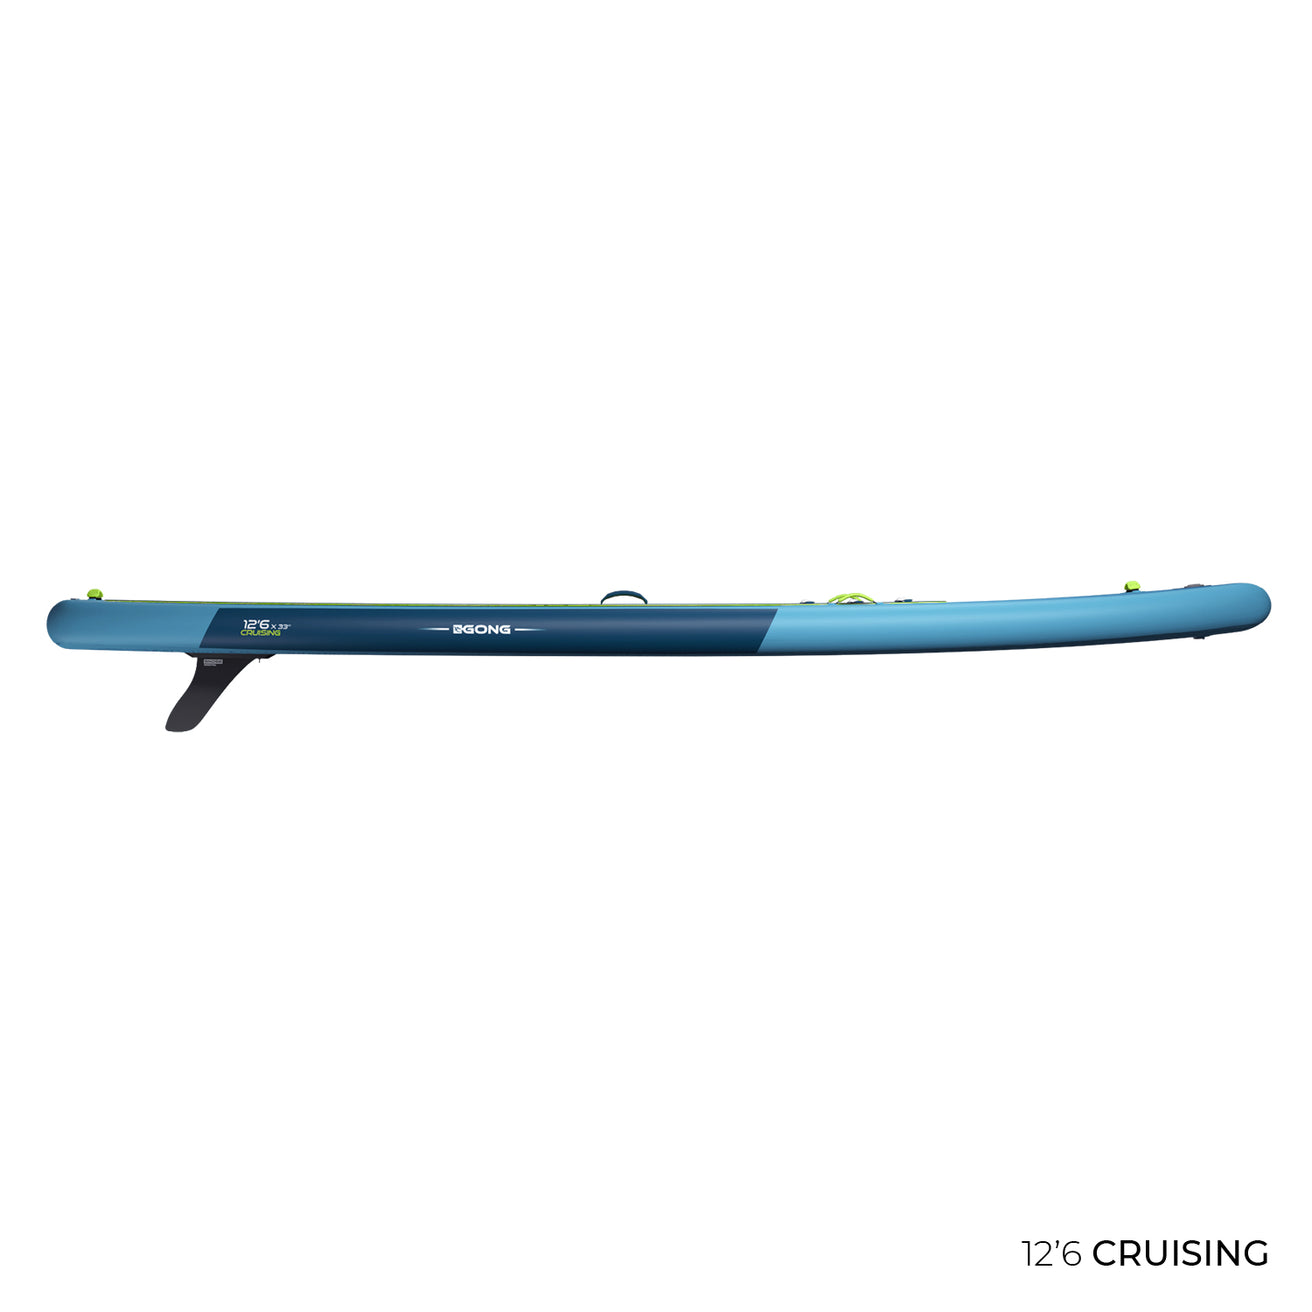 GONG | SUP Inflatable Couine Marie Cruising